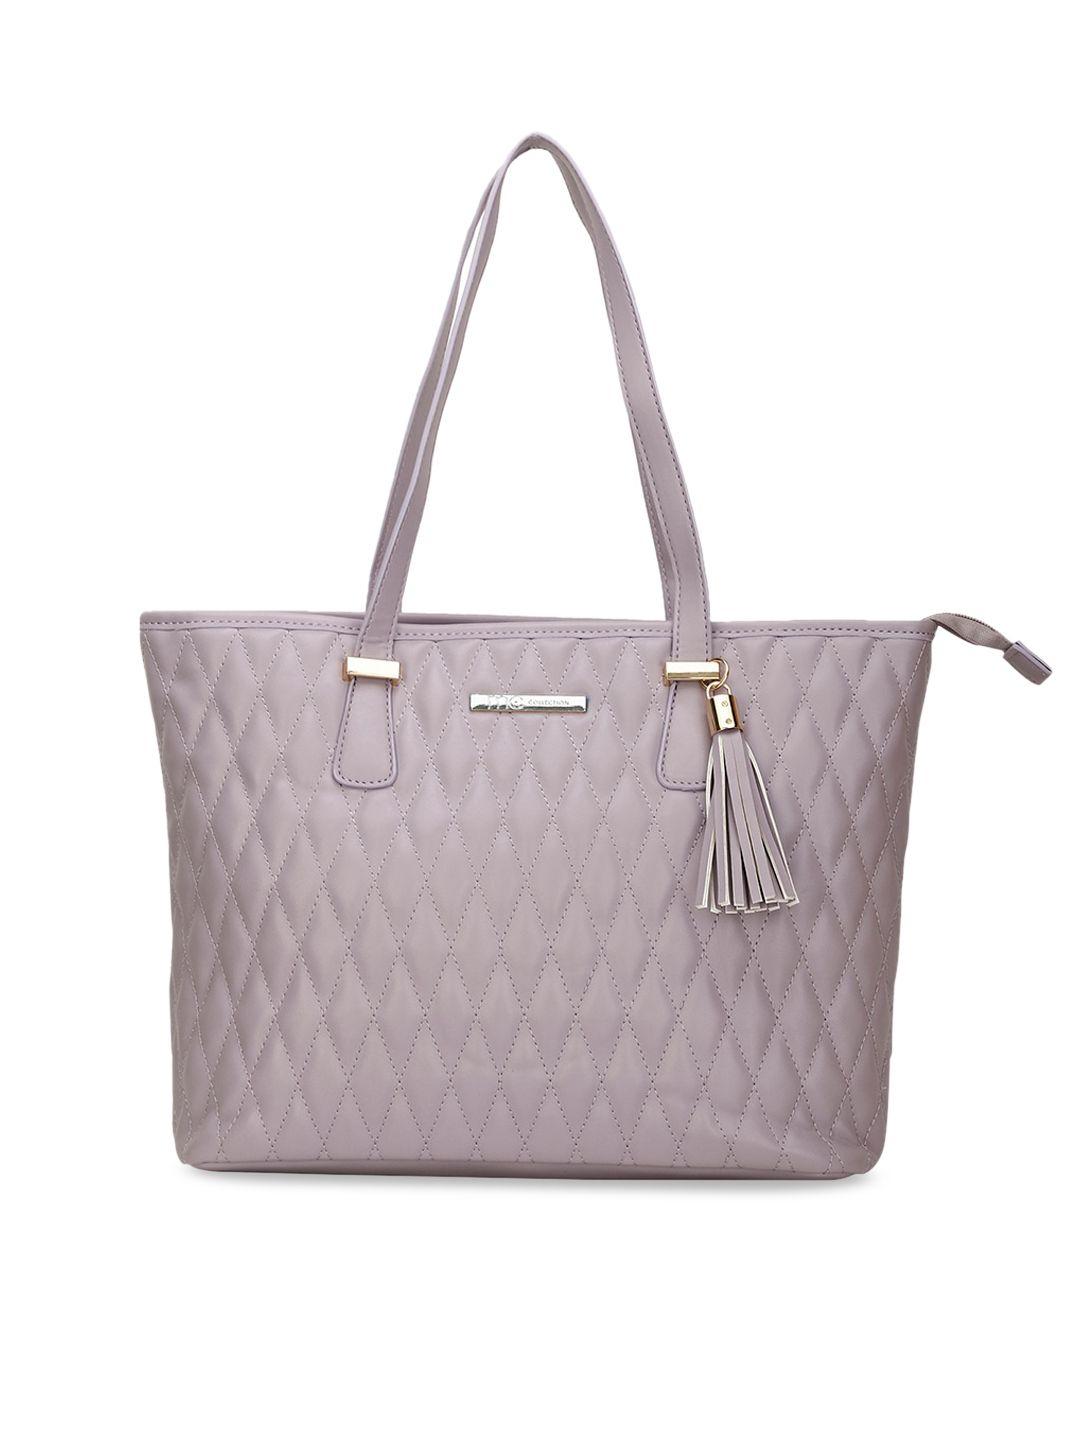 marie claire textured oversized structured tote bag with quilted